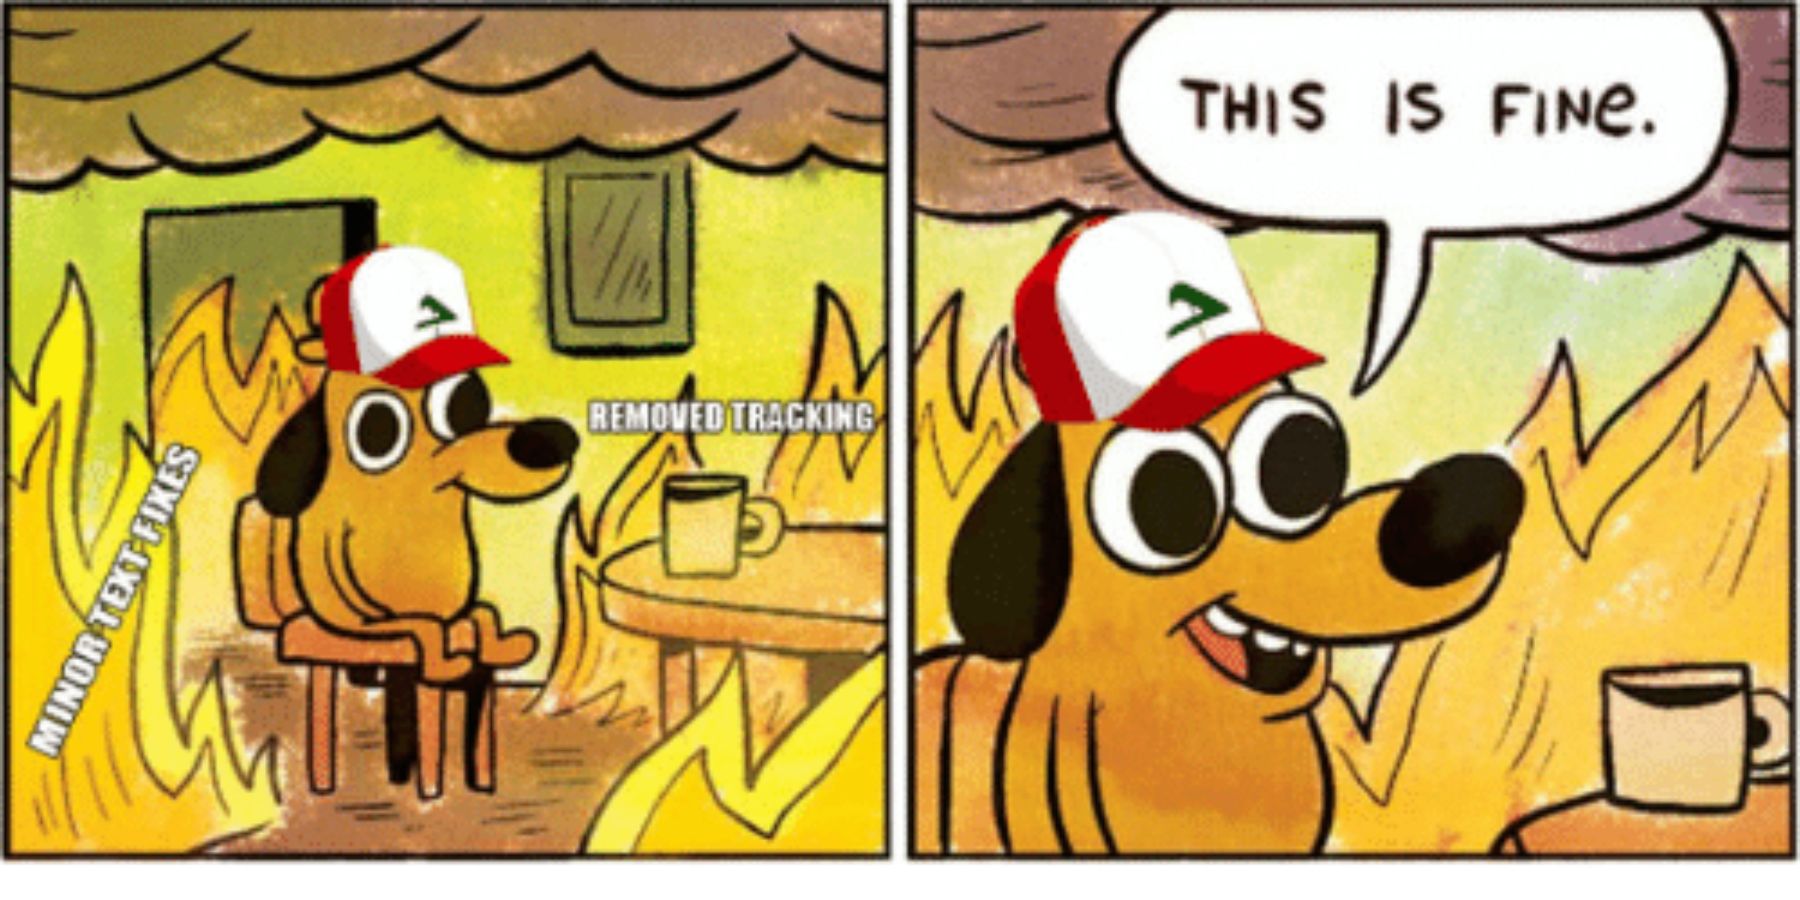 Pokémon 10 This Is Fine Memes That Are Too Funny